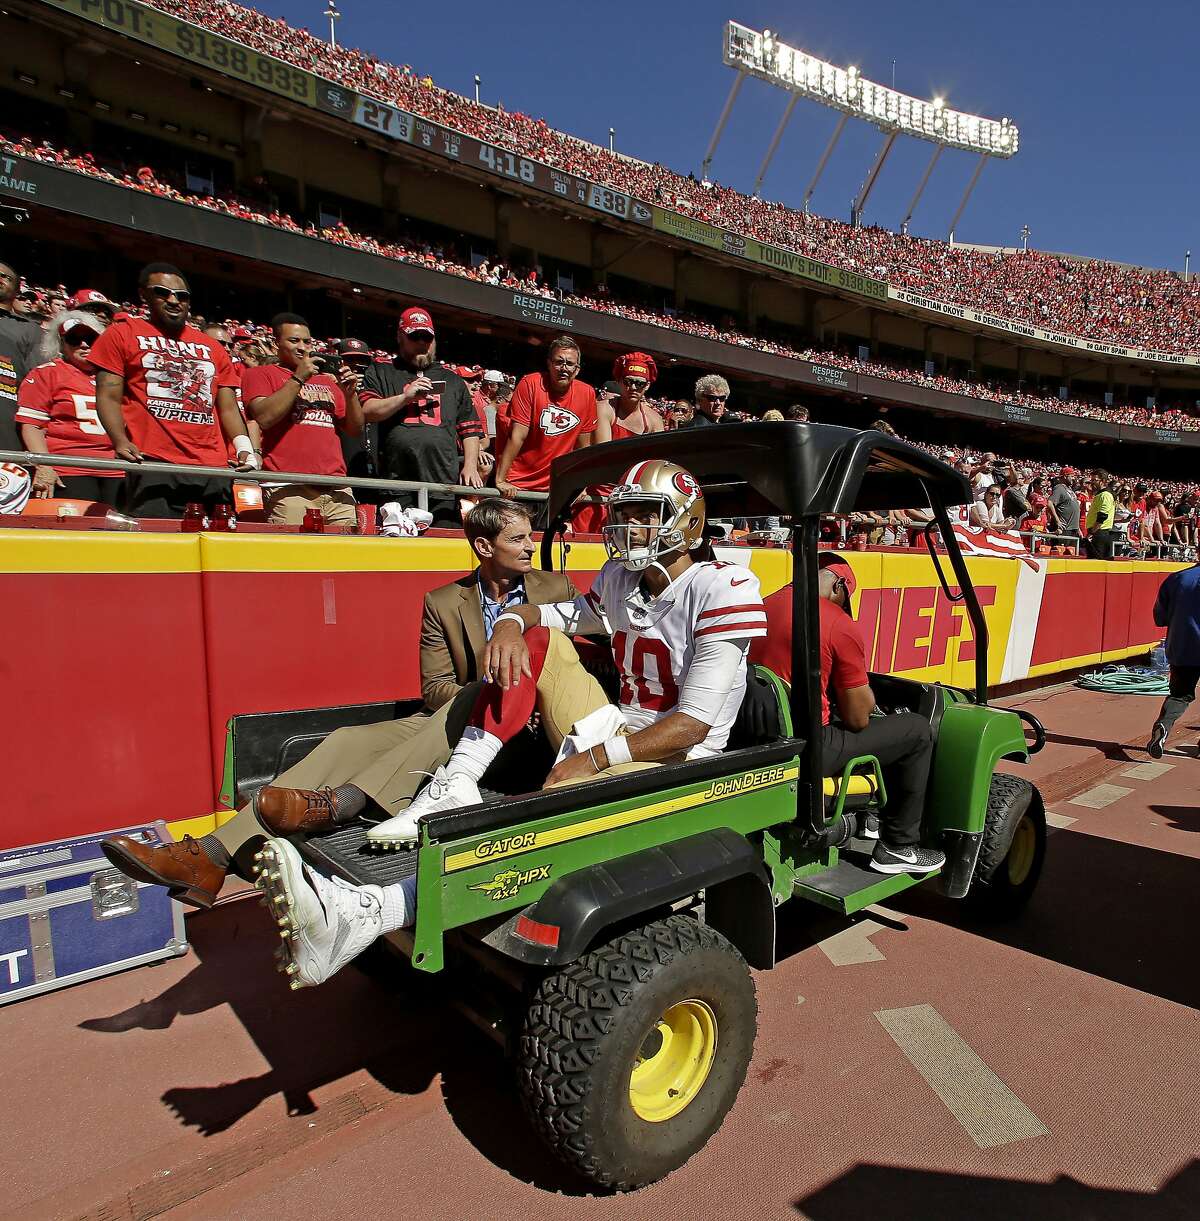 San Francisco 49ers quarterback Jimmy Garoppolo (10) is carted off the field after being injured during the second half of an NFL football game against the Kansas City Chiefs, Sunday, Sept. 23, 2018, in Kansas City, Mo. (AP Photo/Charlie Riedel)